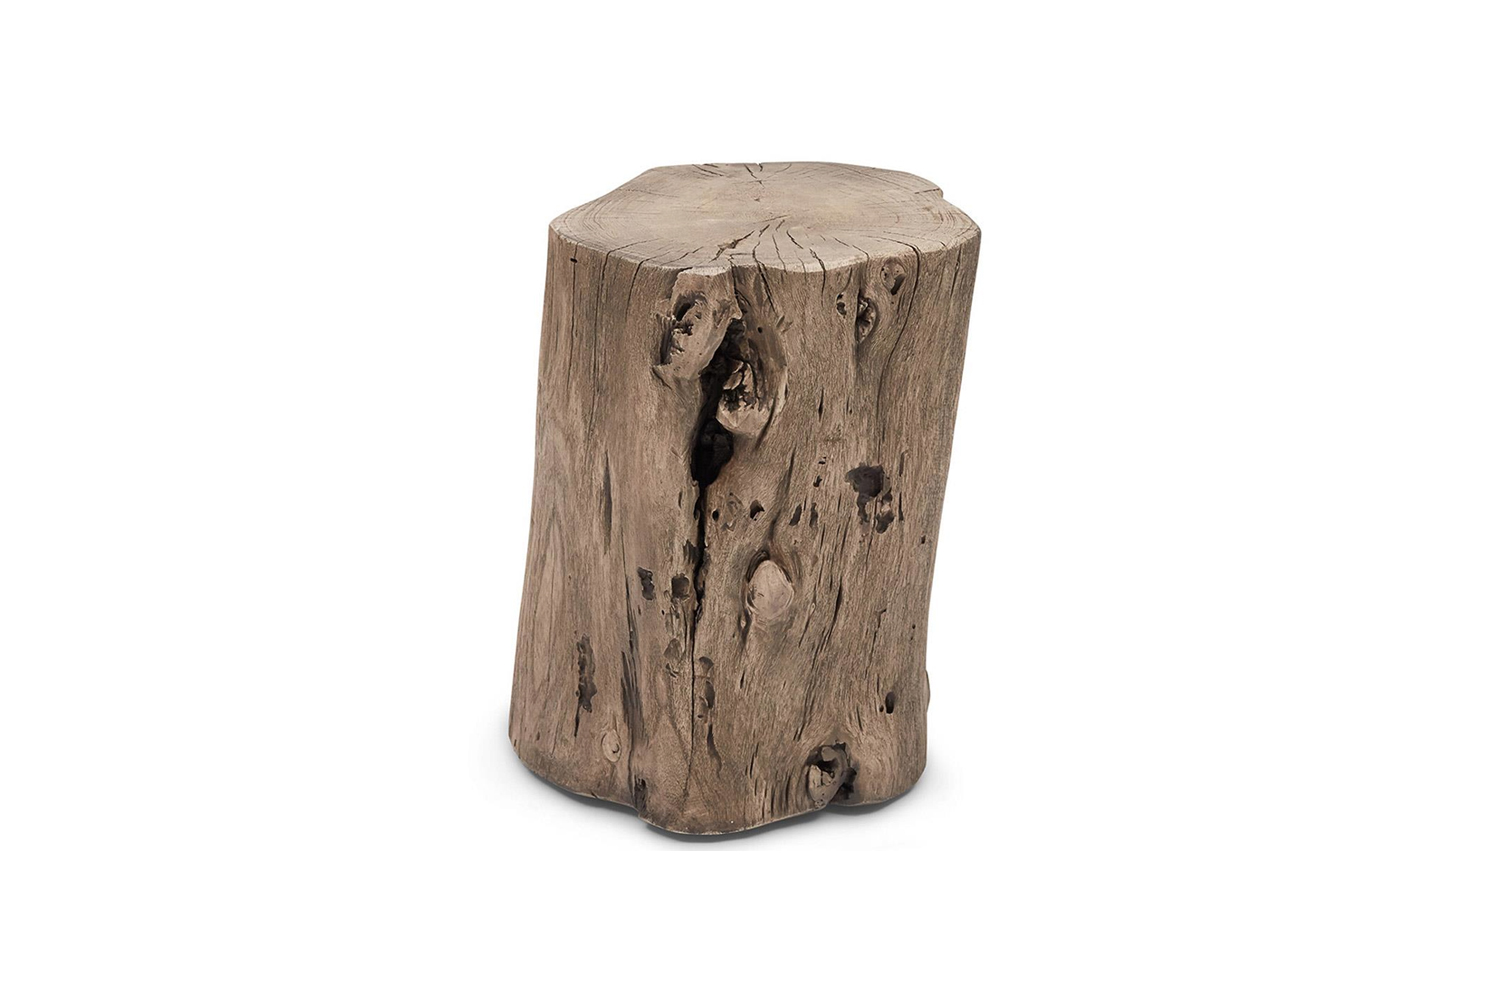 the luna rustic lodge grey wood stump drum side or end table, shown in grey, is 15